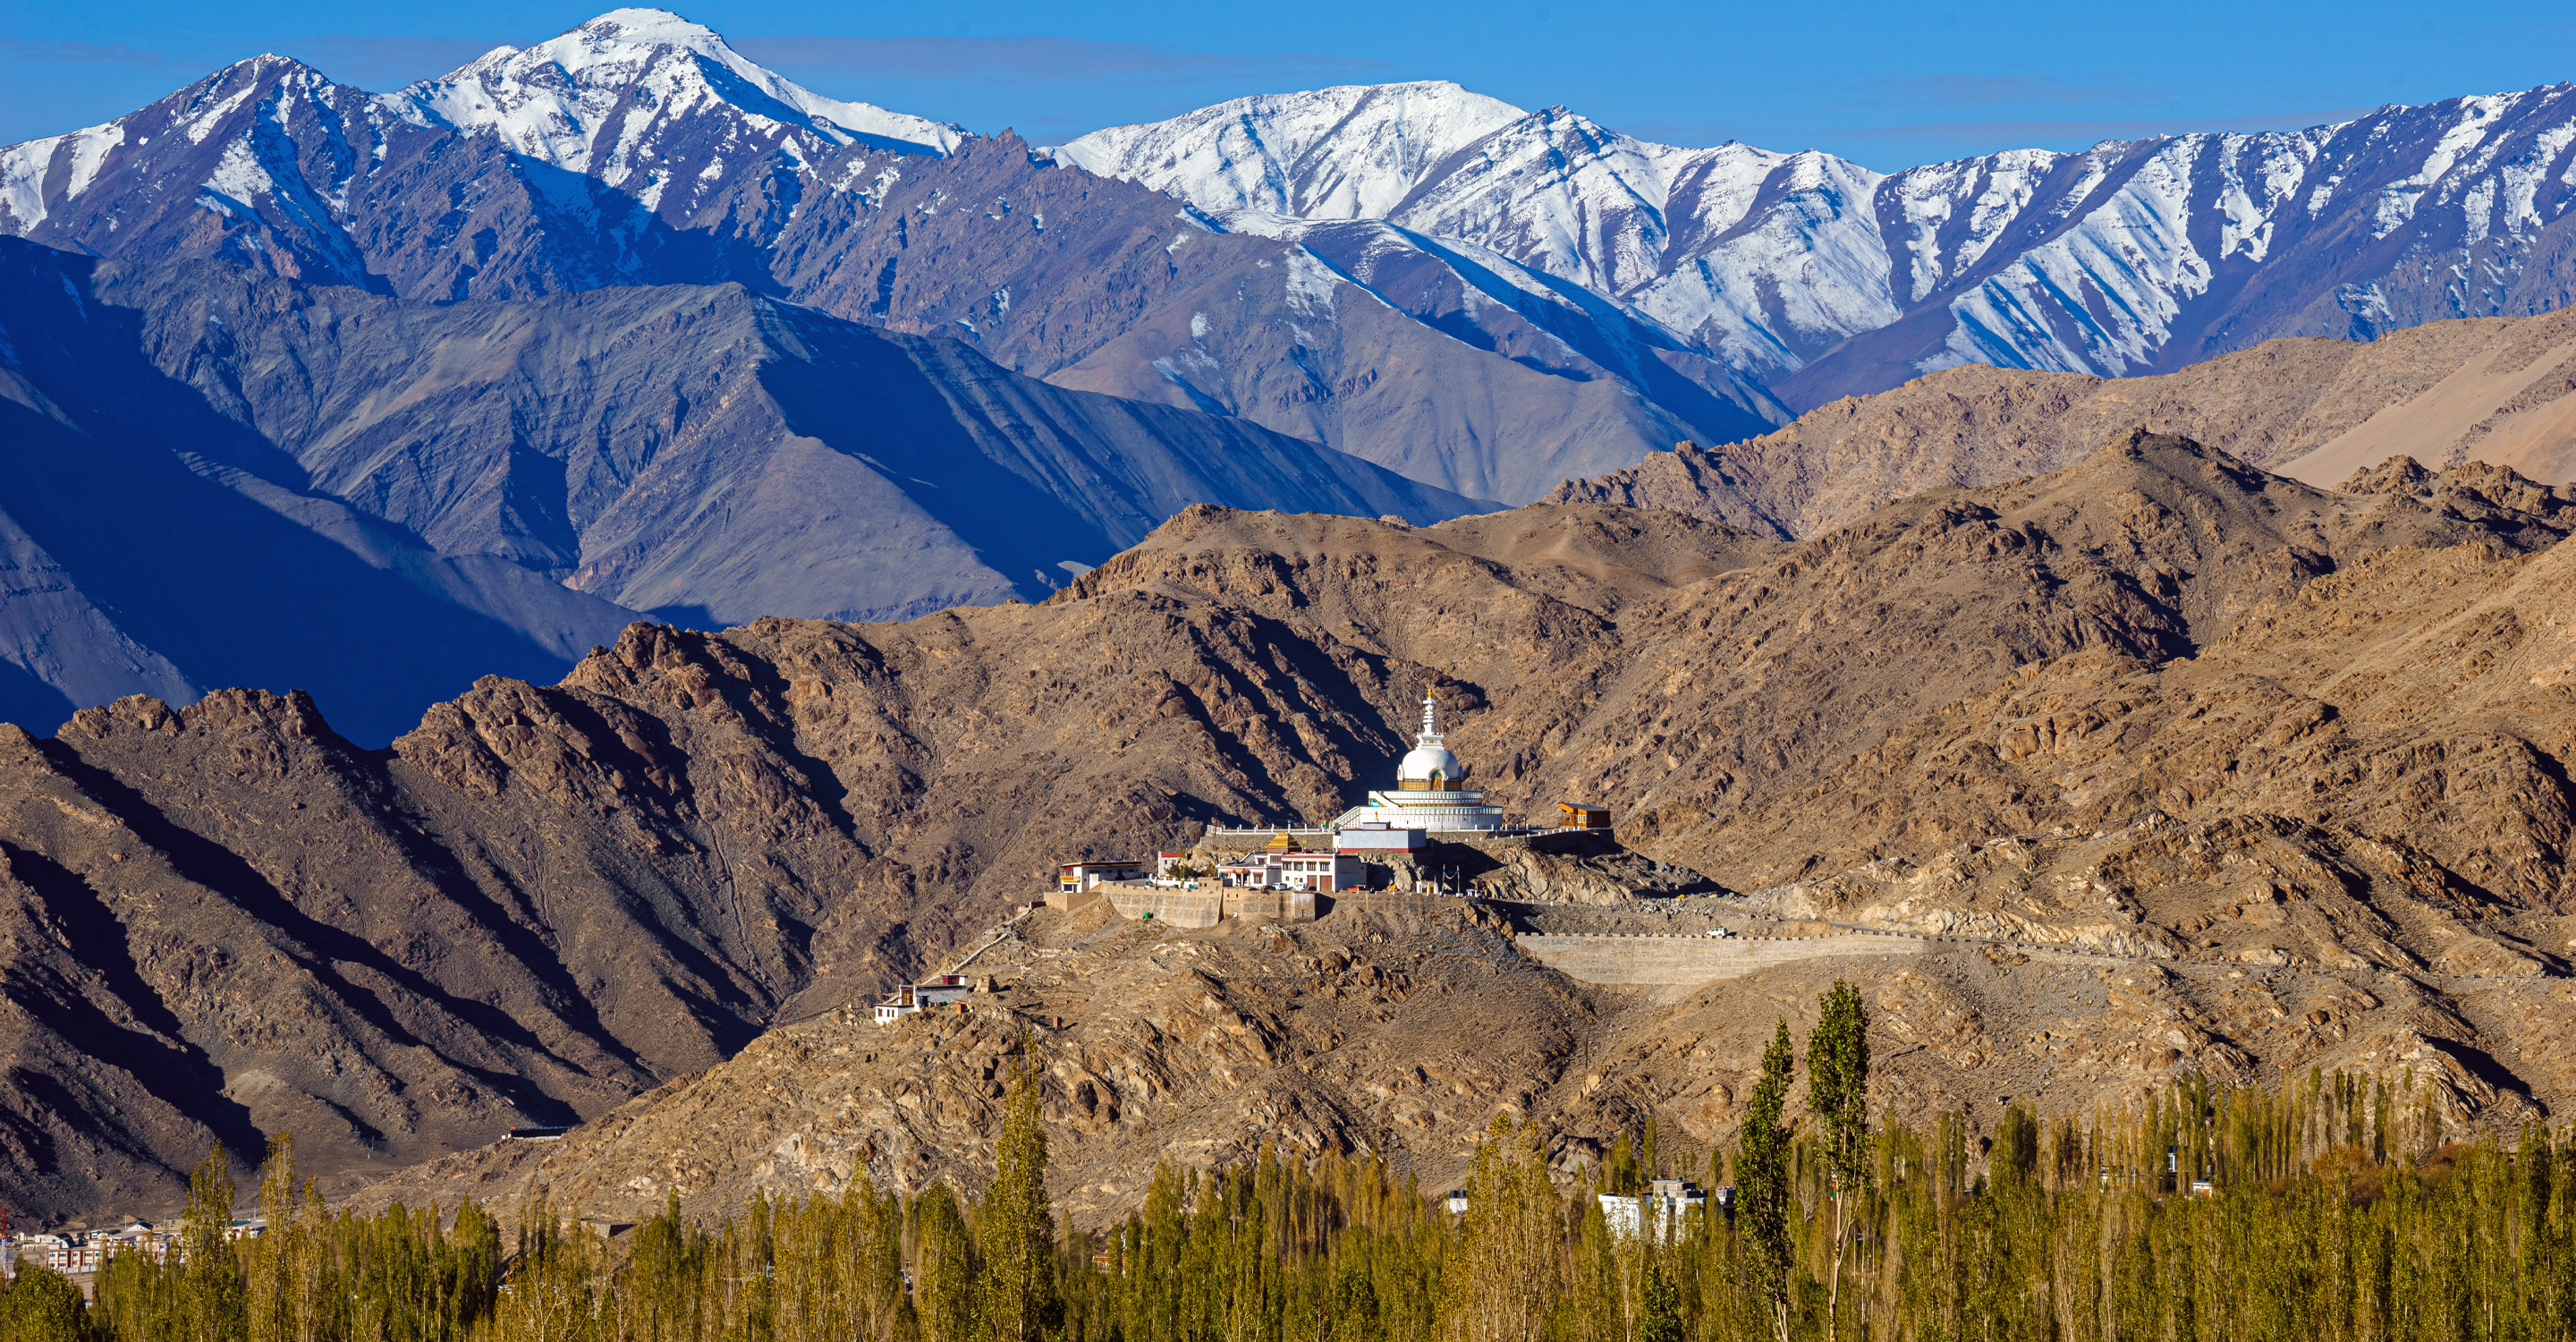 A stupa surrounded by the mountains in Ladakh, India